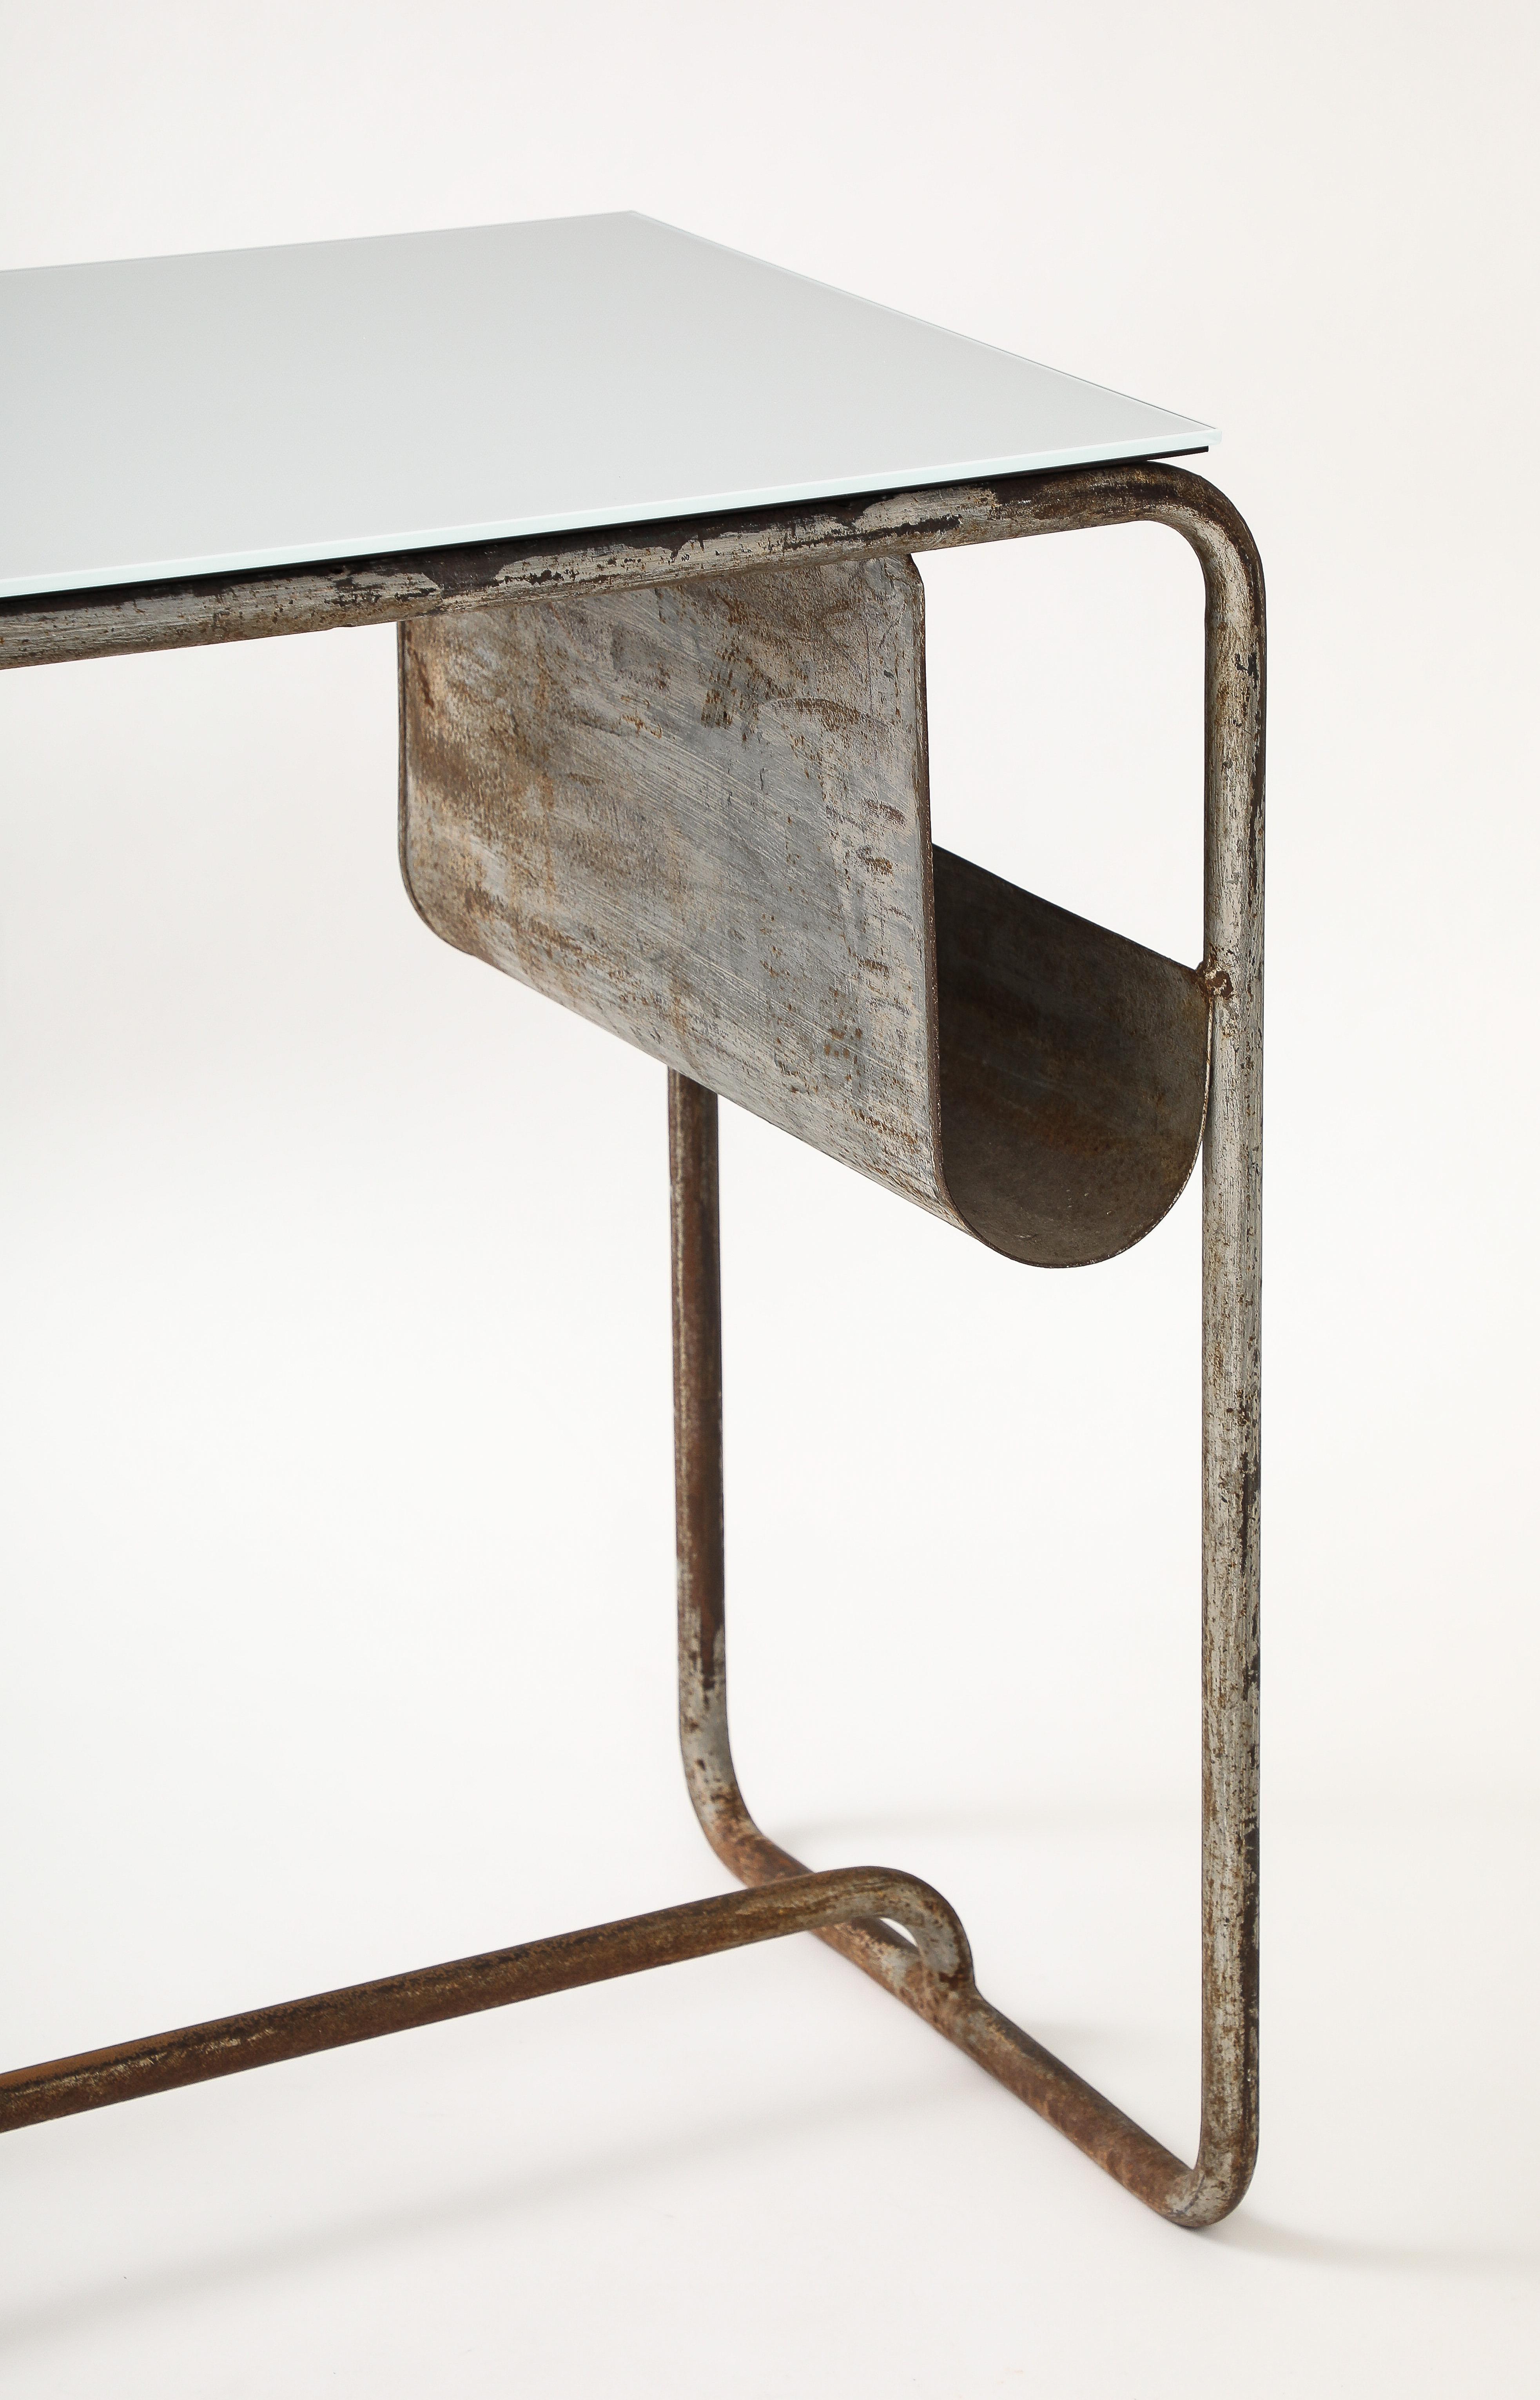 Early Modernist Desk Side Table, Nickel Patina, Opaline Top, France, c. 1920 In Good Condition For Sale In Brooklyn, NY